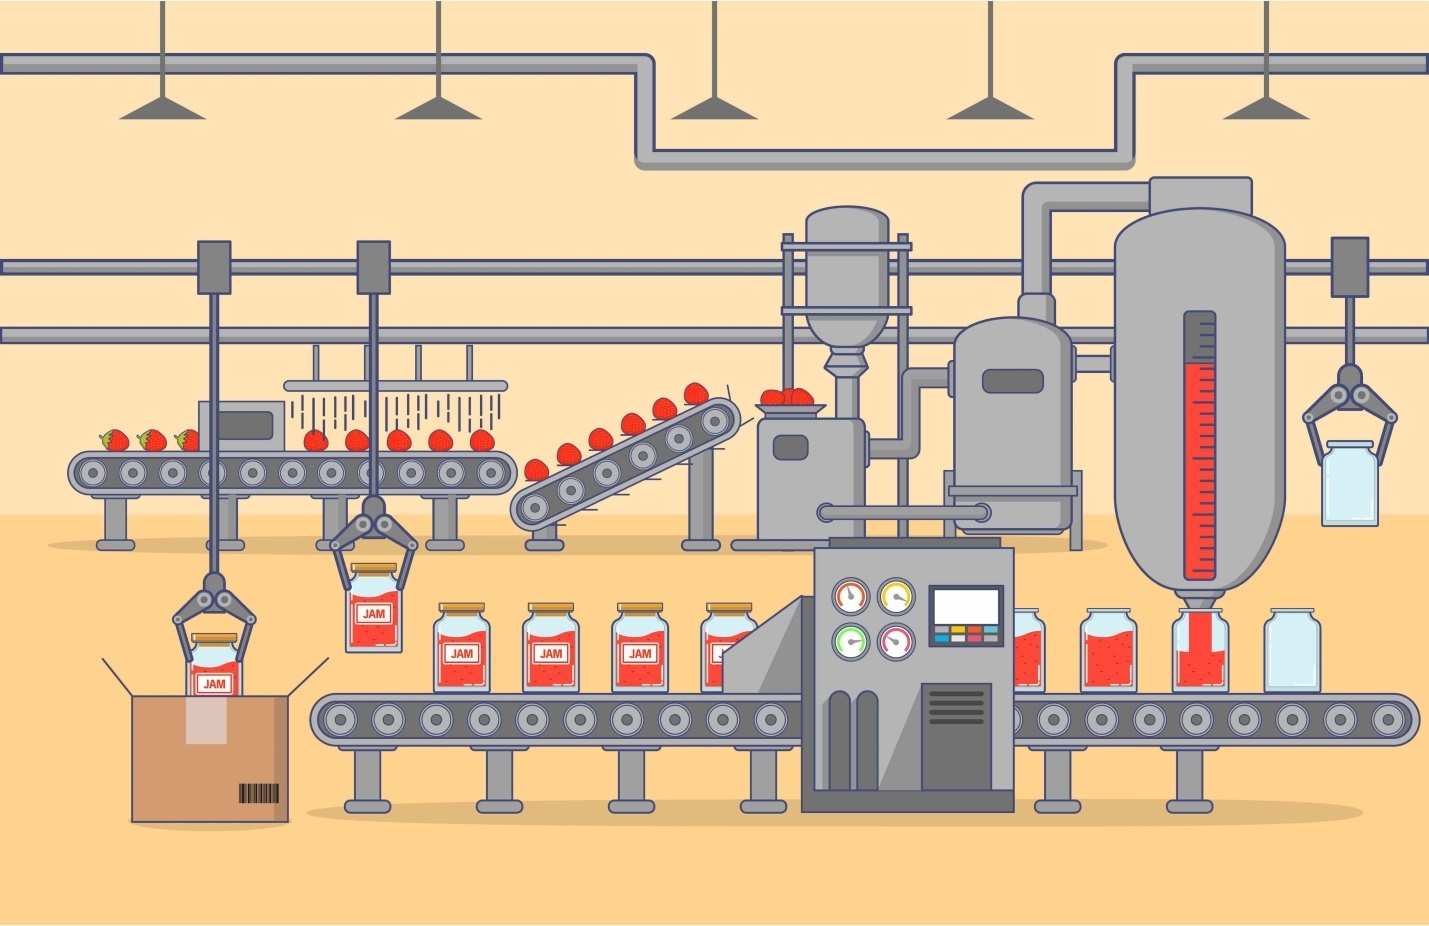 An illustration of a complete automated food processing system for jam production.